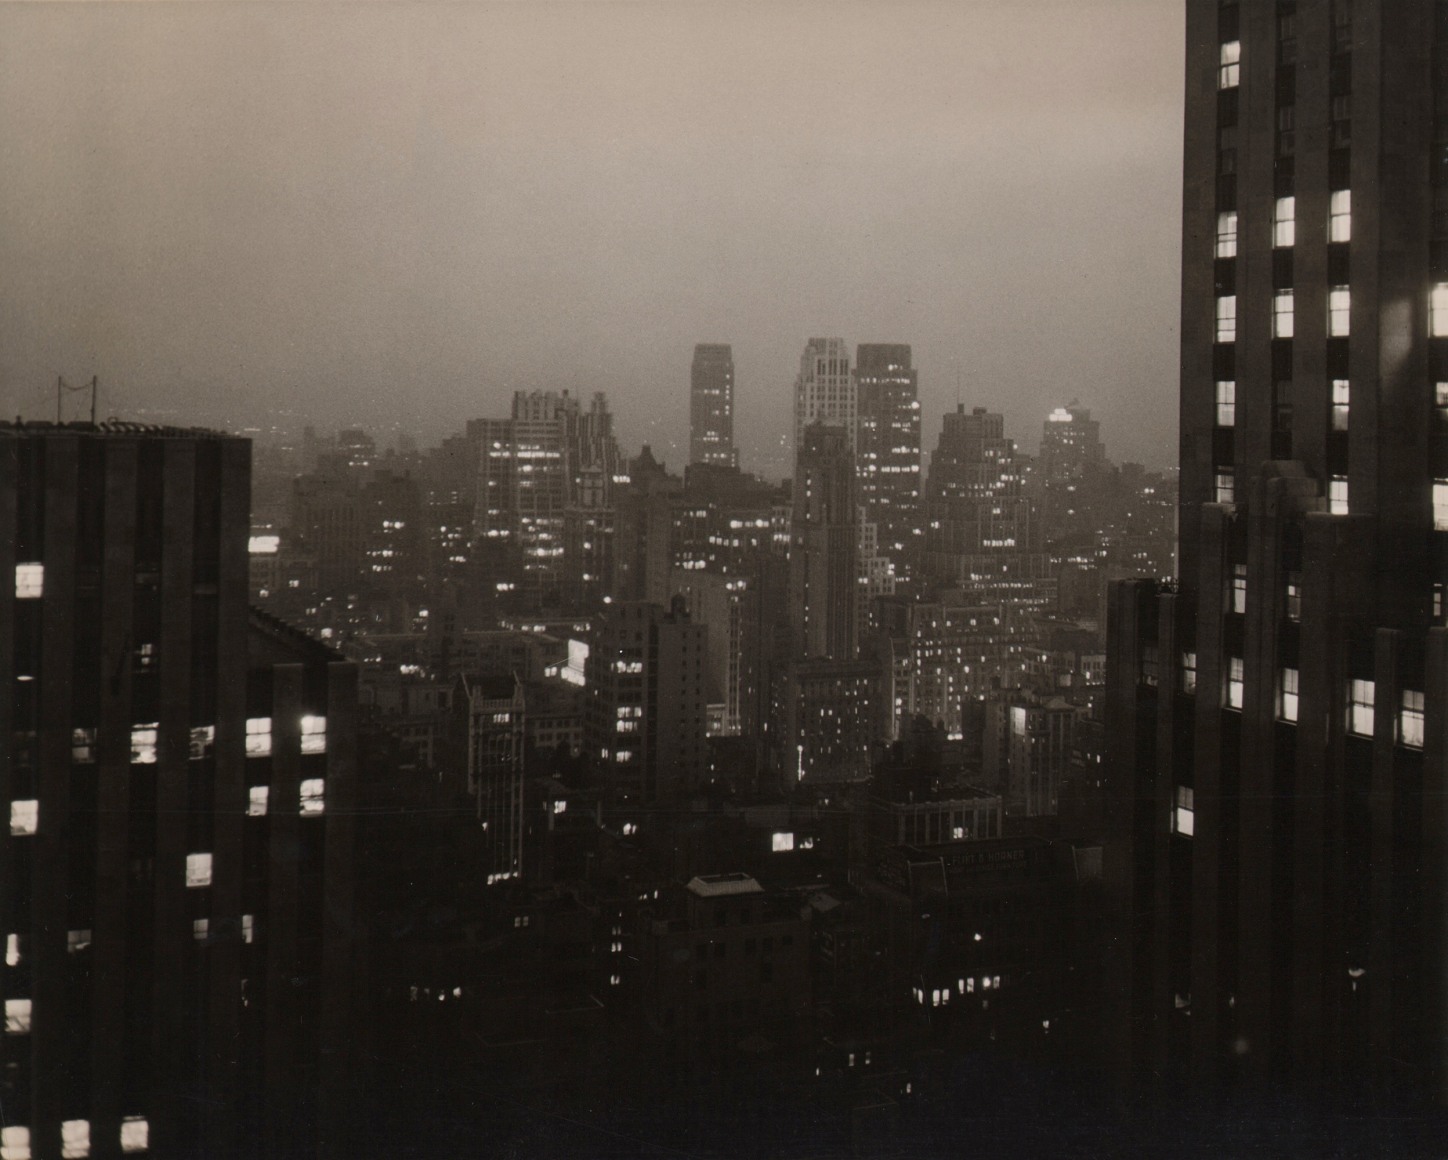 Paul J. Woolf, New York Skyline at Night, ​c. 1935. Night time cityscape. Two close buildings on the left and right foreground with skyscrapers across the background center.